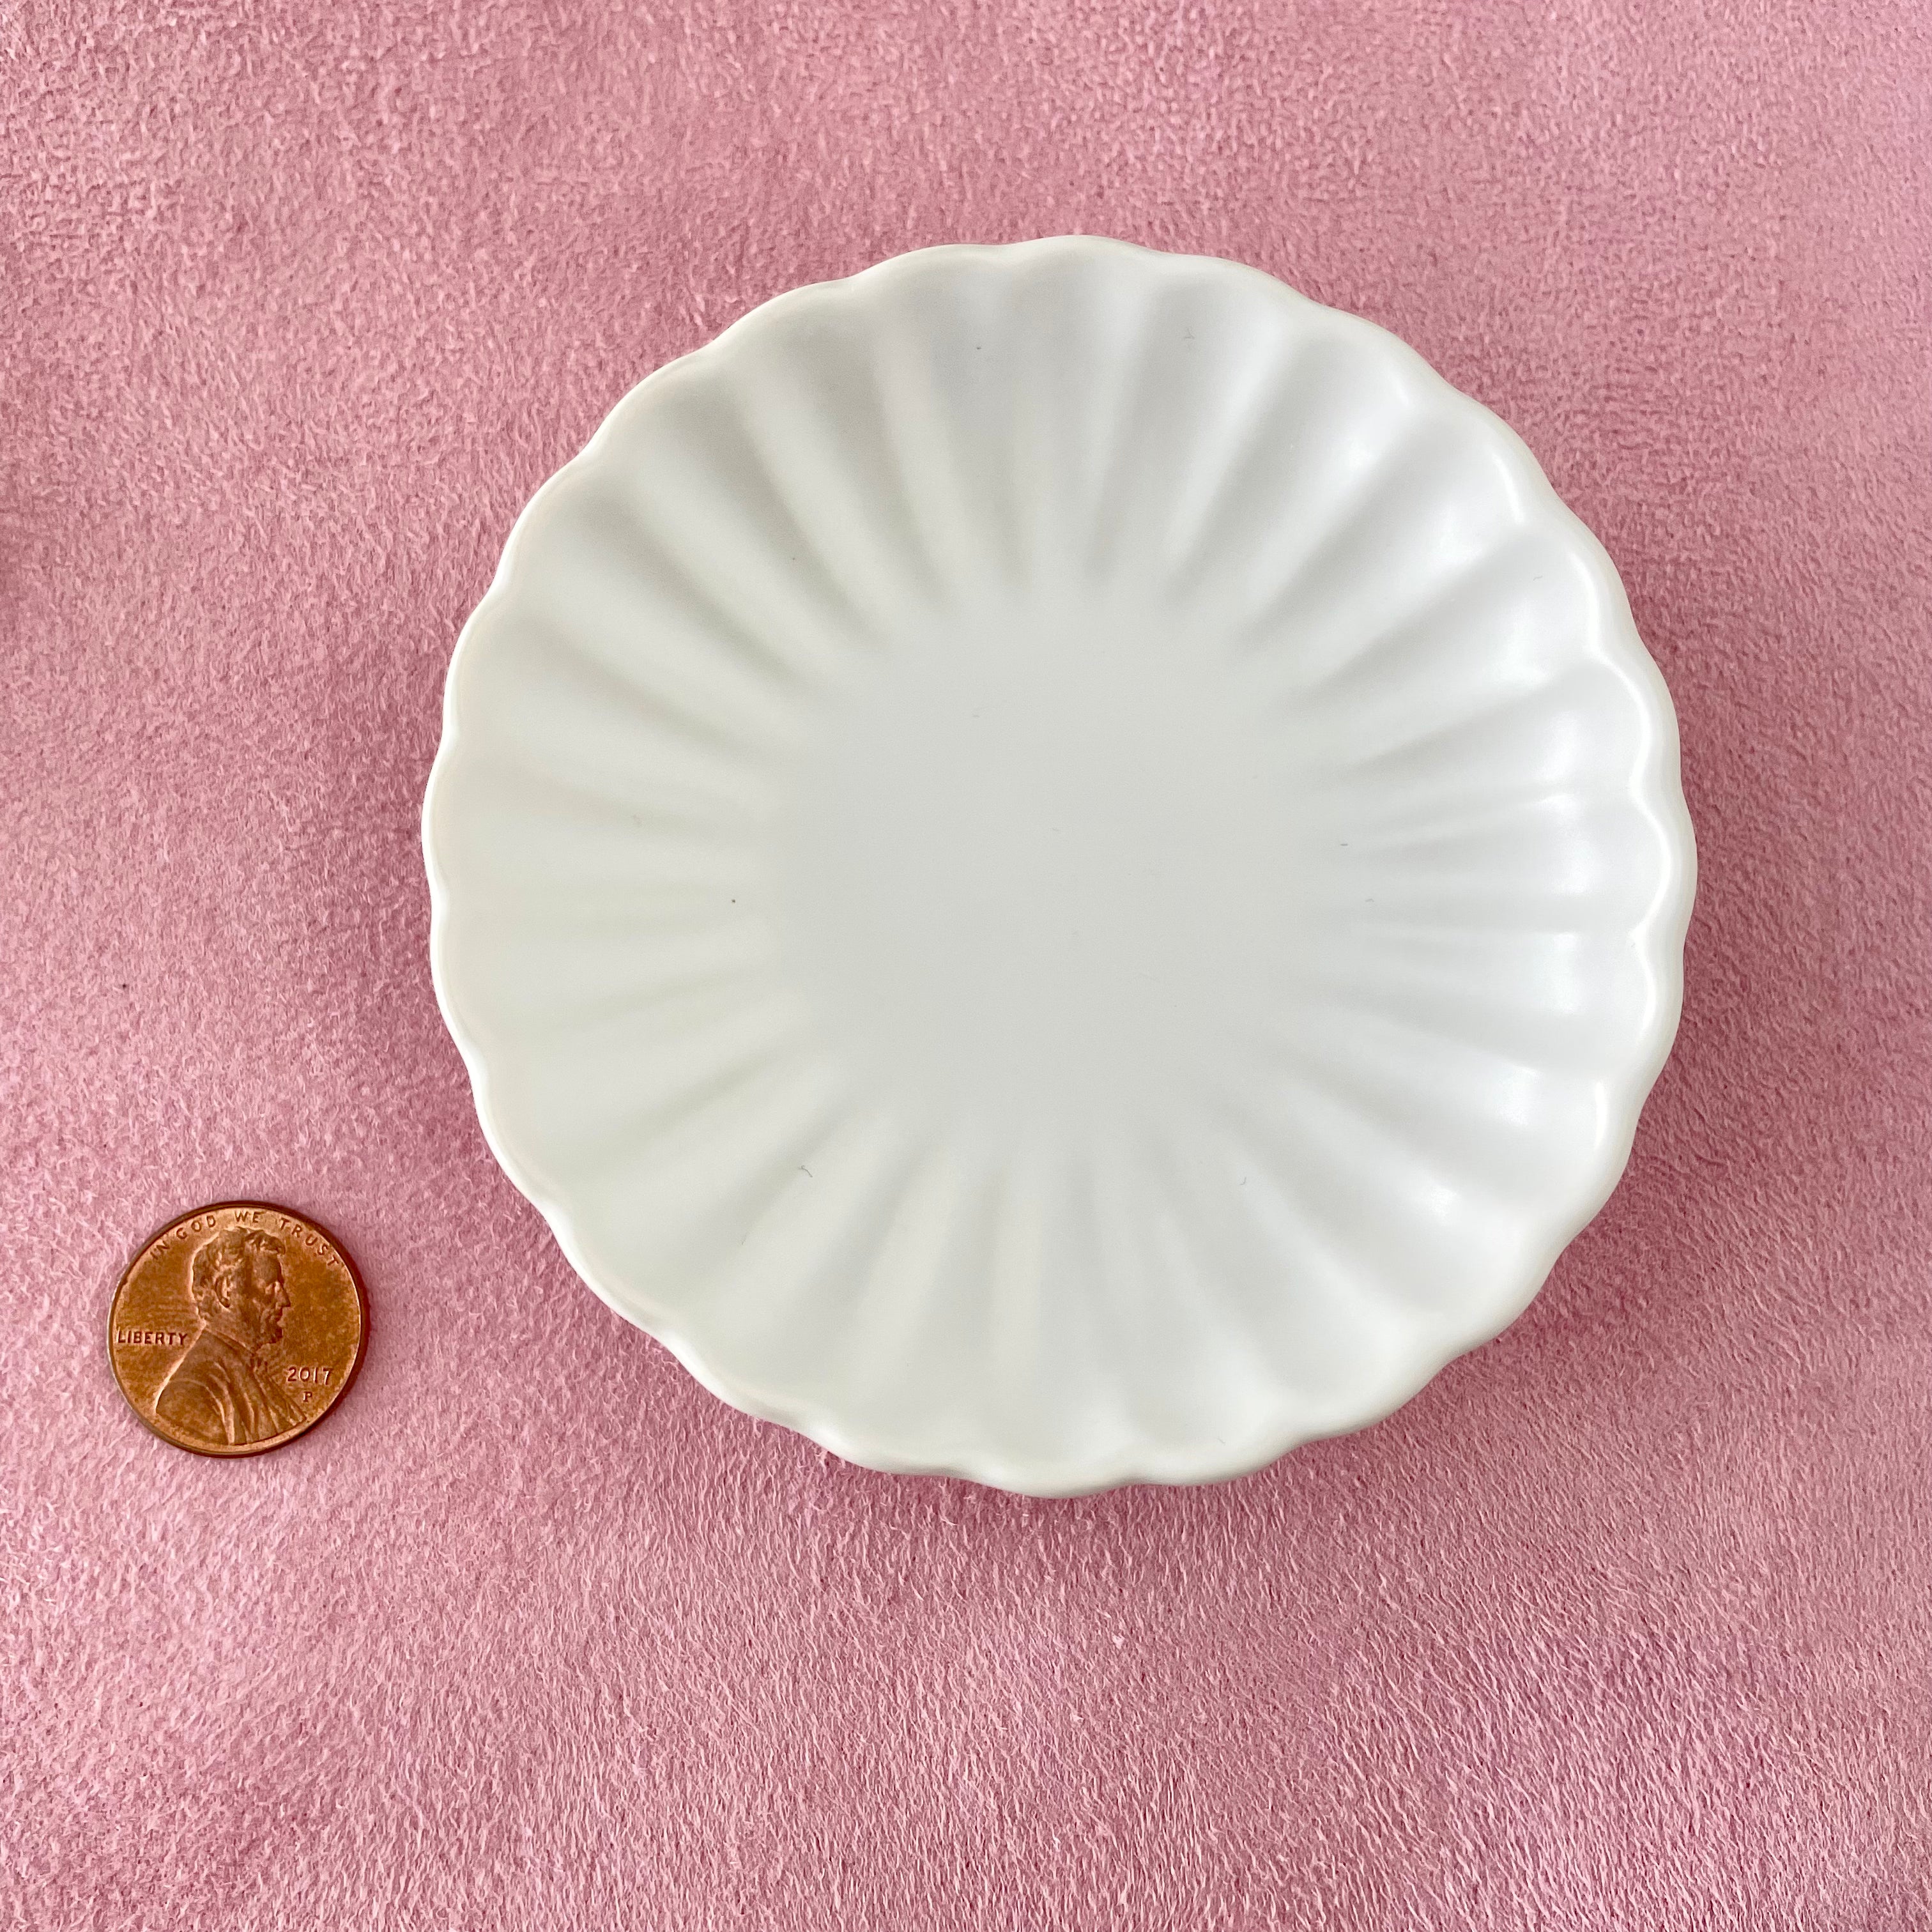 Matte white scalloped dish with penny beside for size reference - wedding flat lay props from Champagne & GRIT